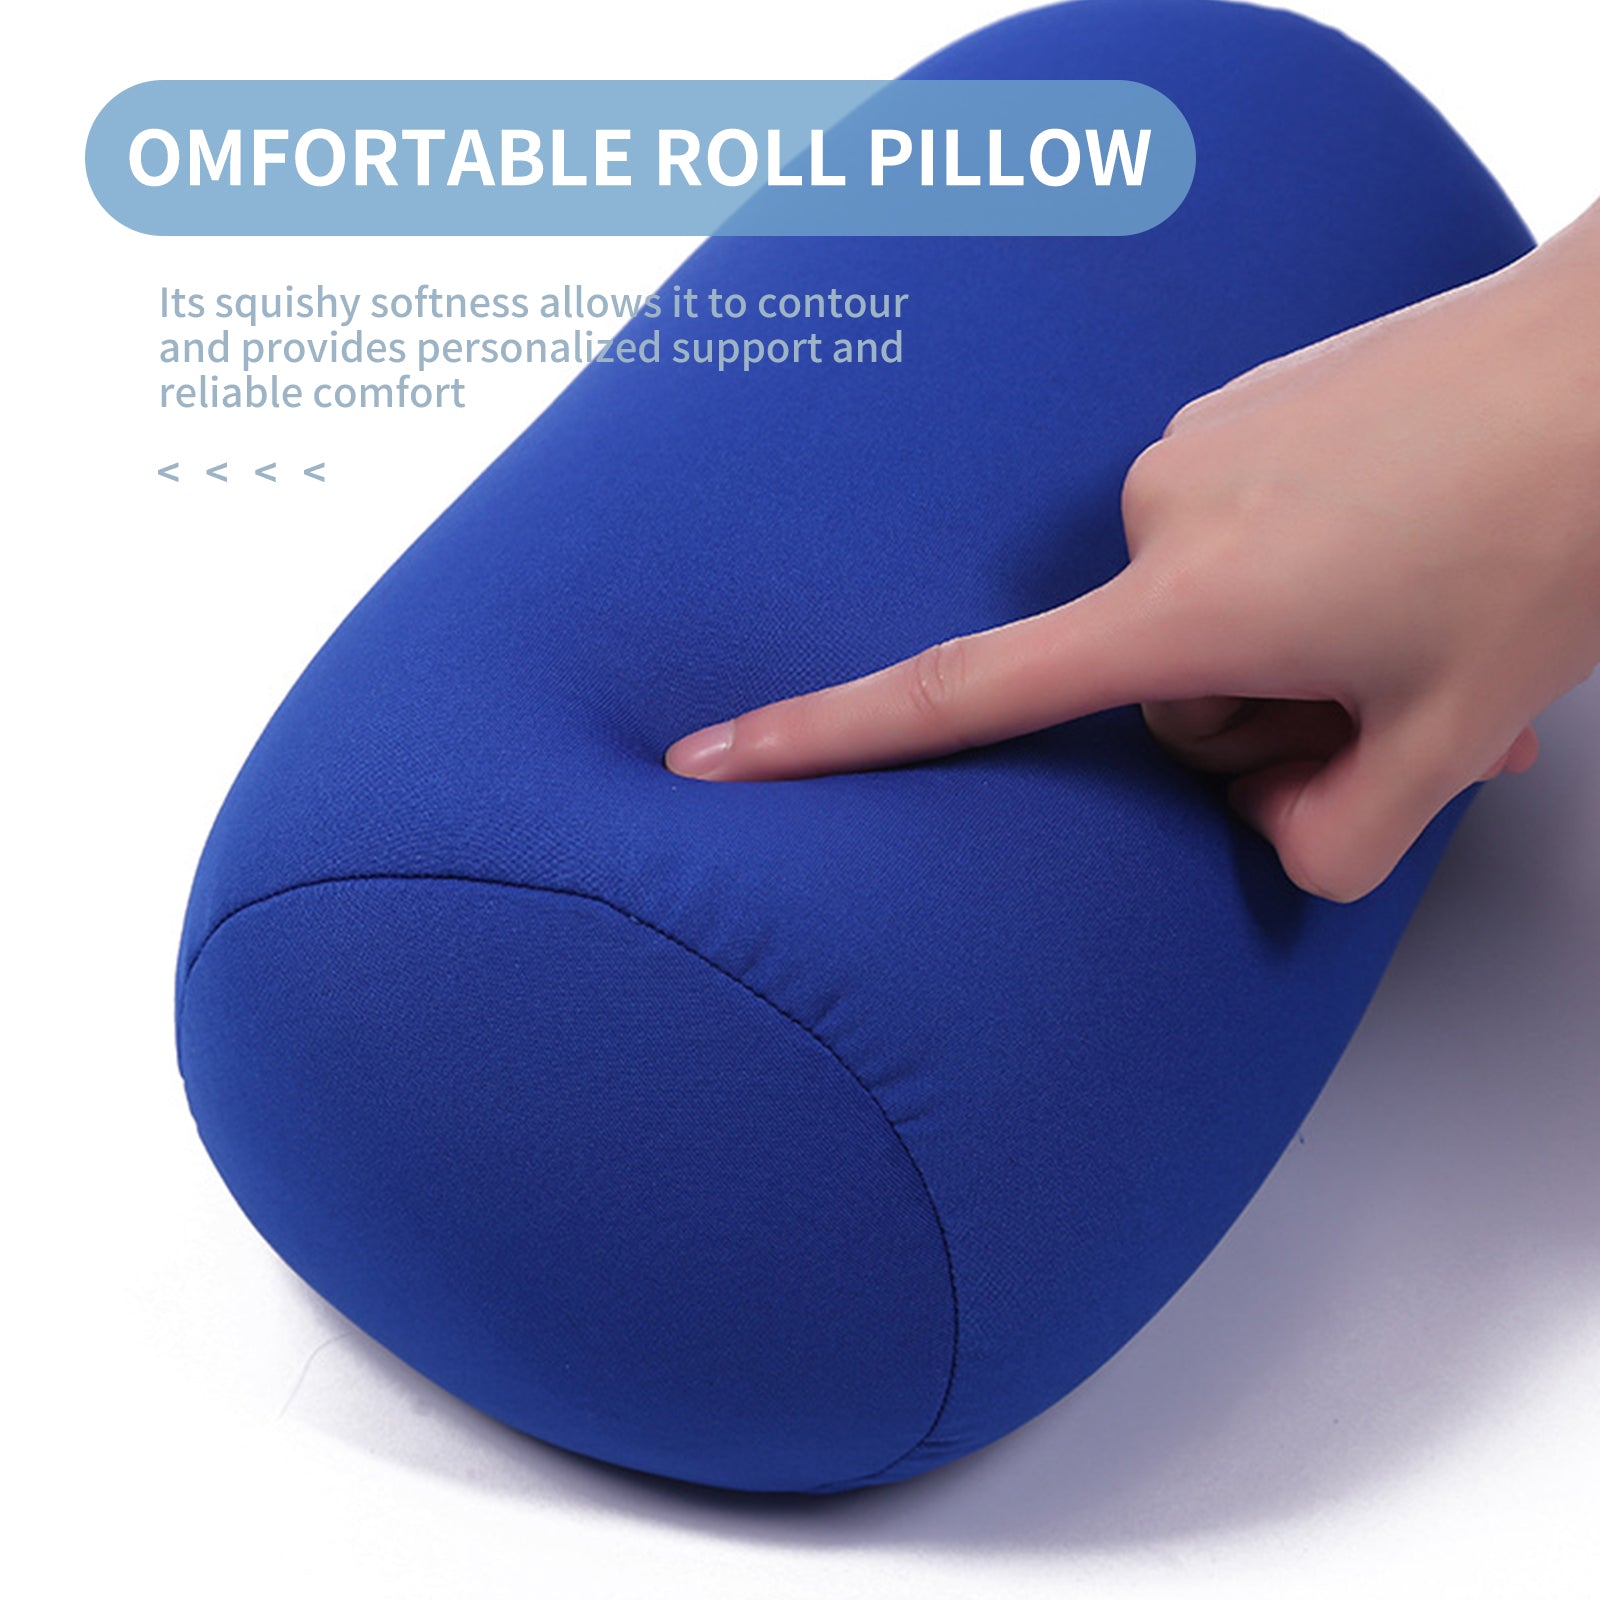 Comfortable Roll Pillow Round Cylinder Microbead Neck Back Support Roll Pillow Tube Pillow Cushie Pillows 12 X 7 Inch